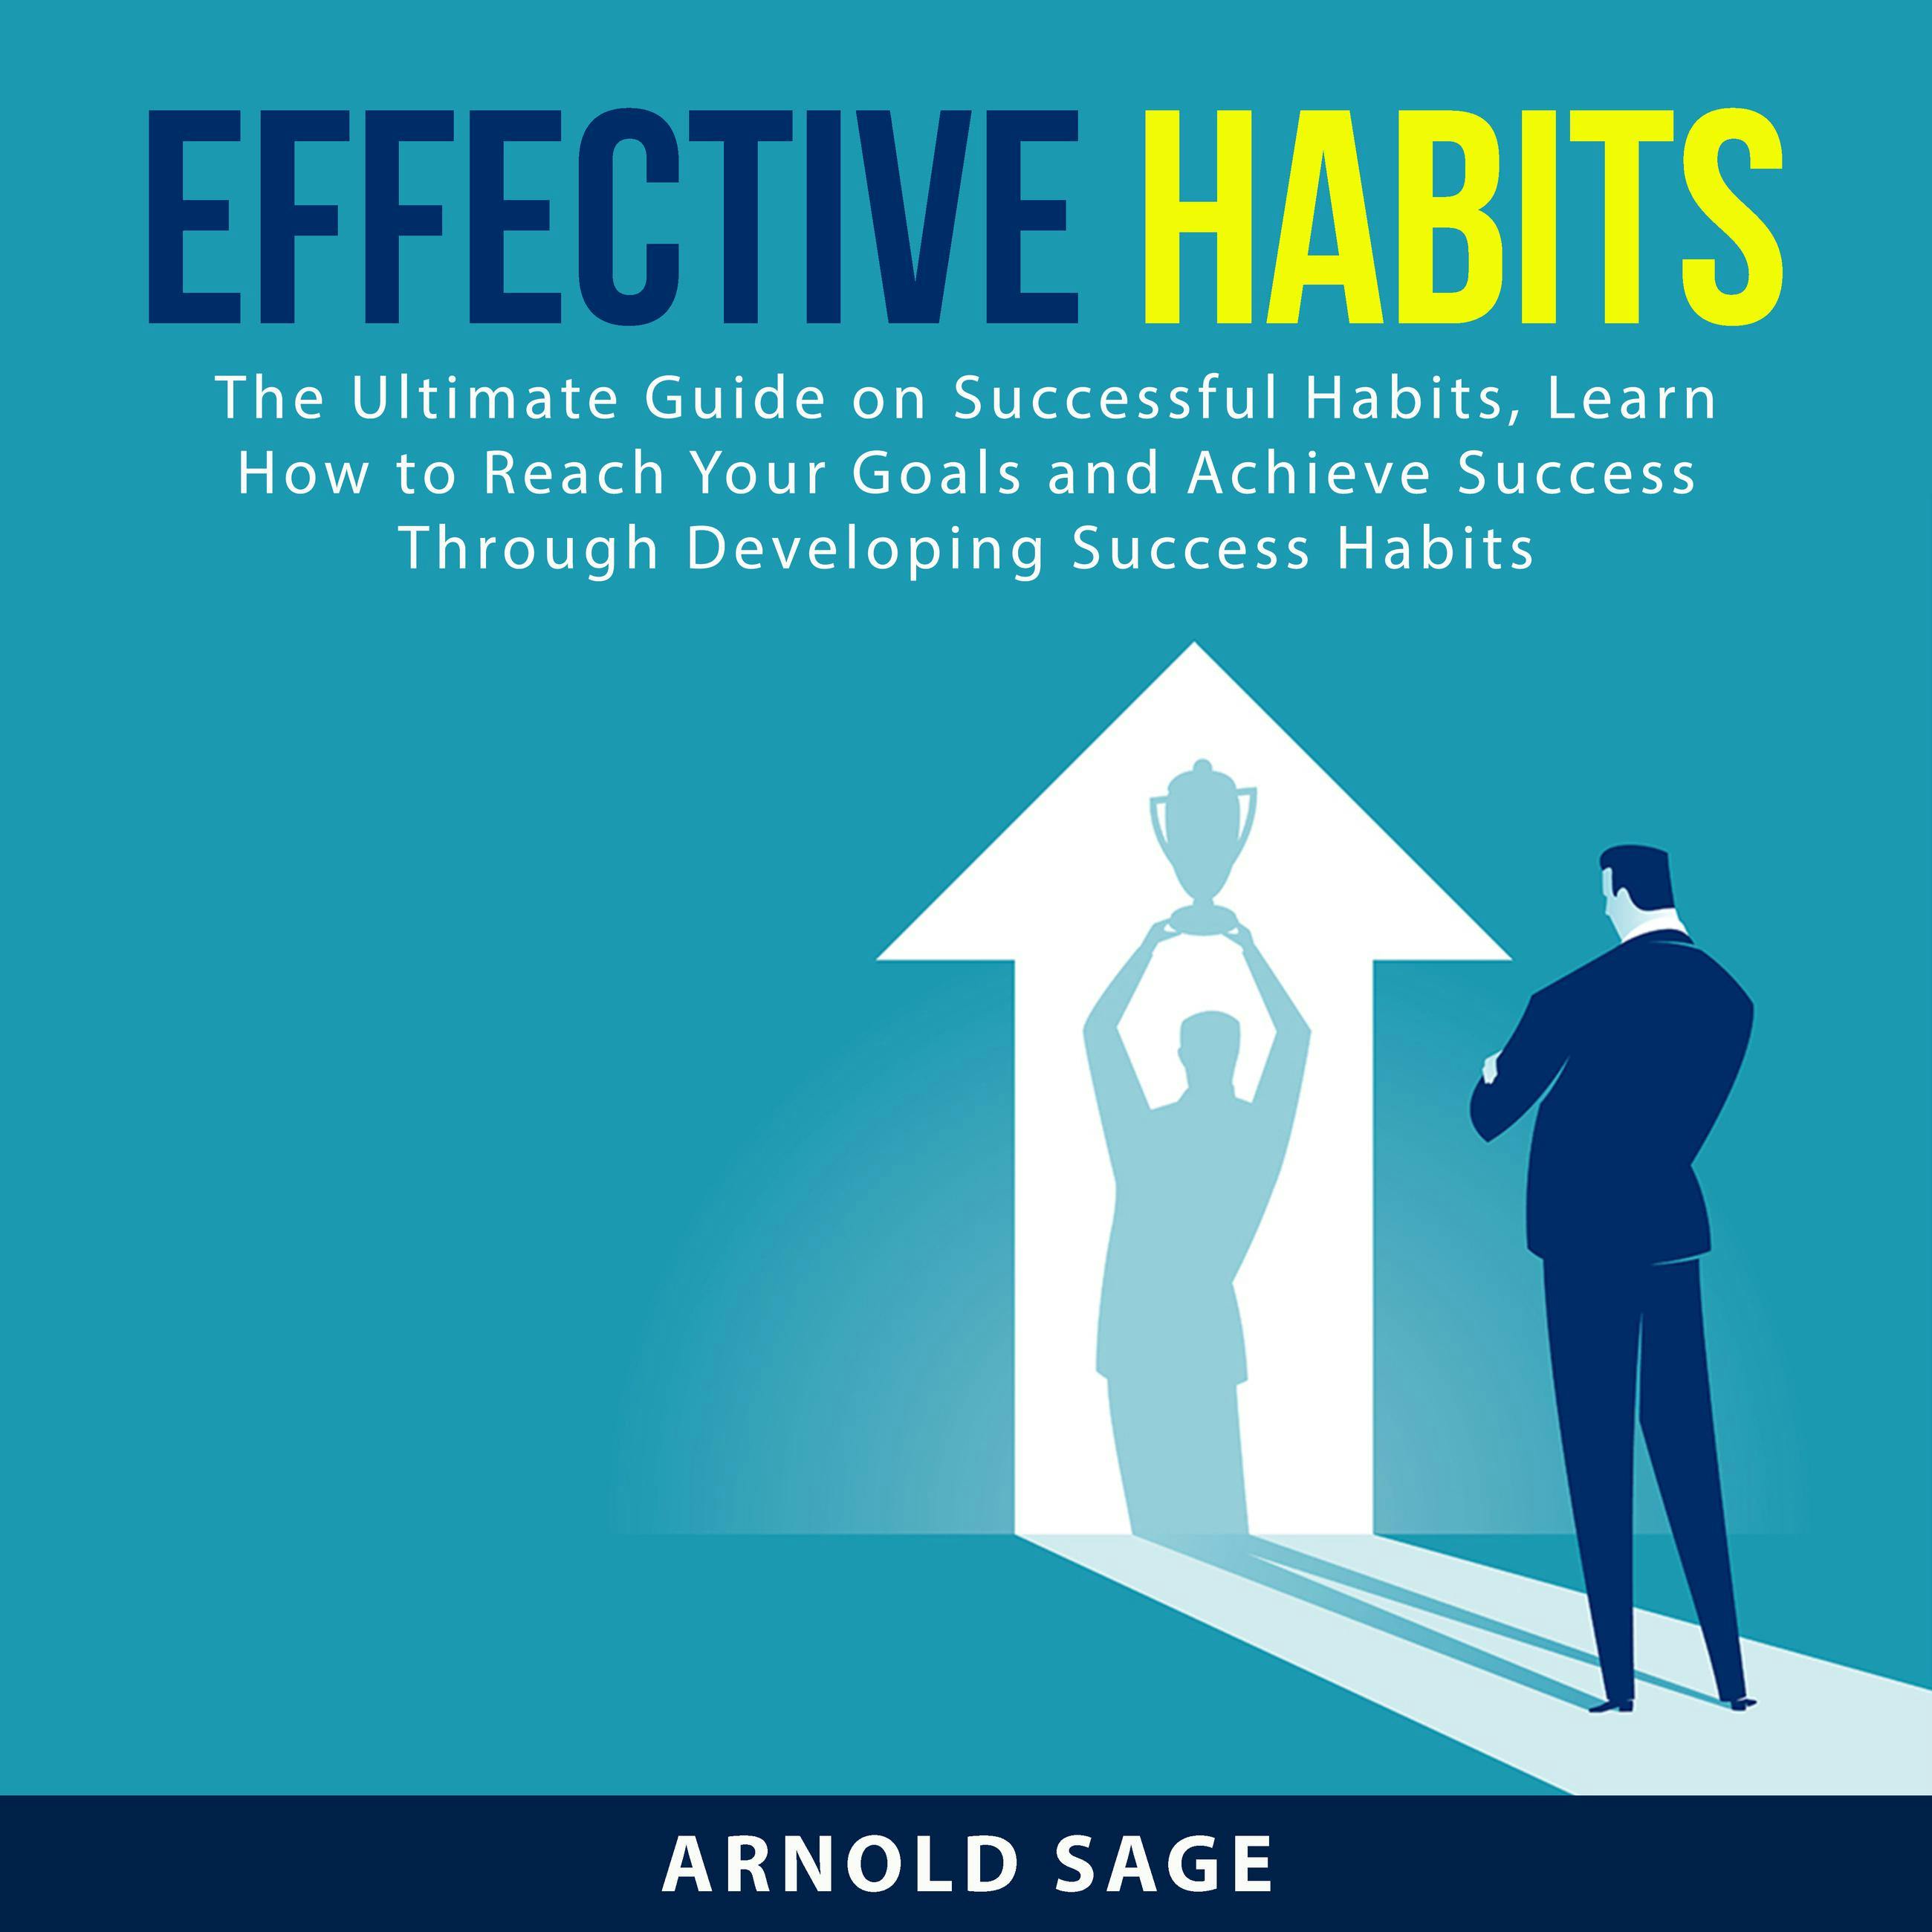 Effective Habits: The Ultimate Guide on Successful Habits, Learn How to Reach Your Goals and Achieve Success Through Developing Success Habits - Arnold Sage